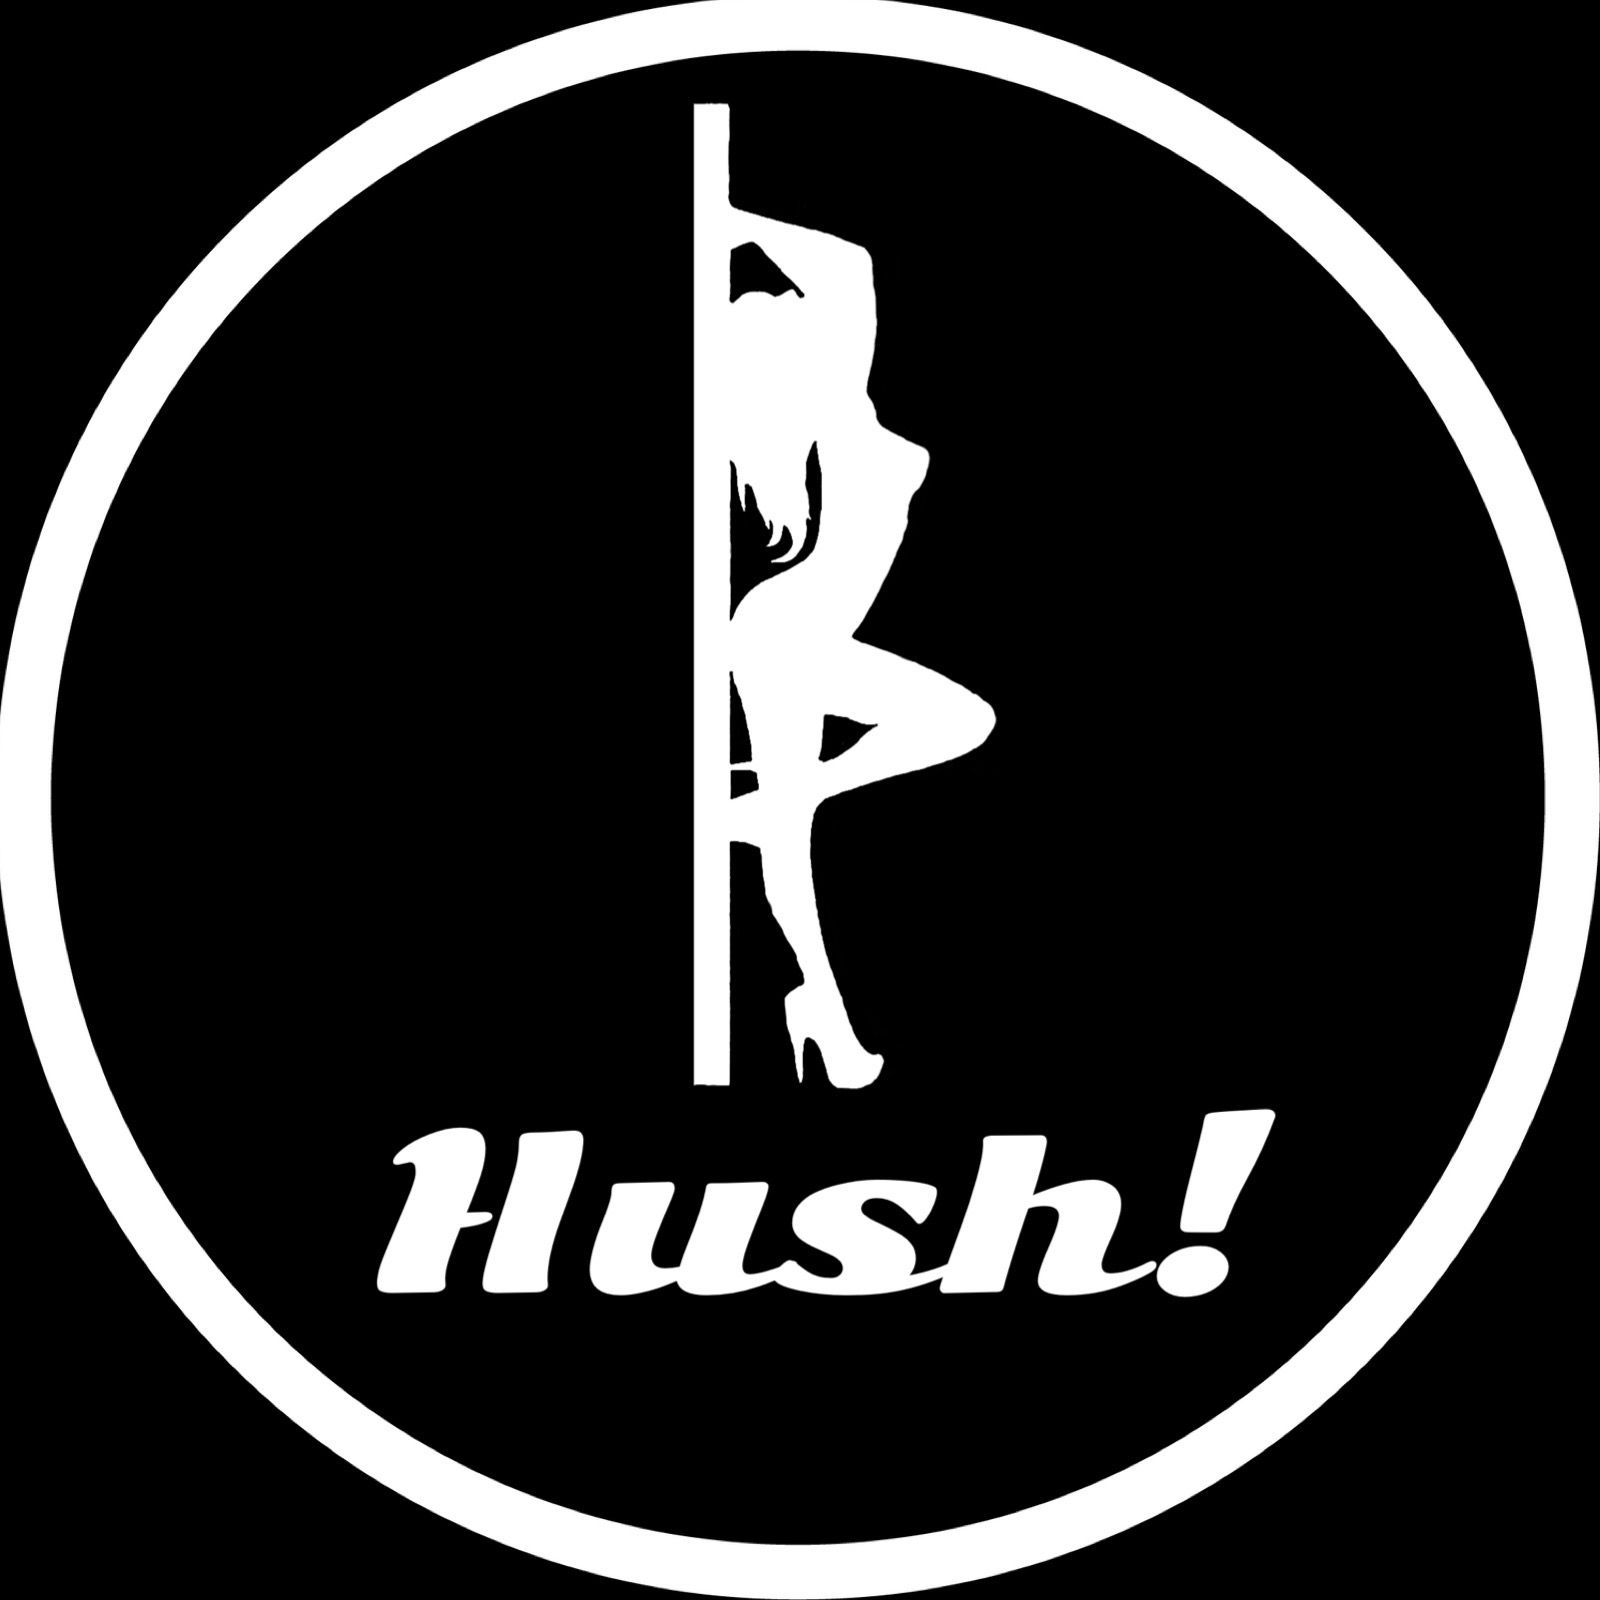 Hush! - Hush! Vol. 70- One on One with 50 Plus a Tip